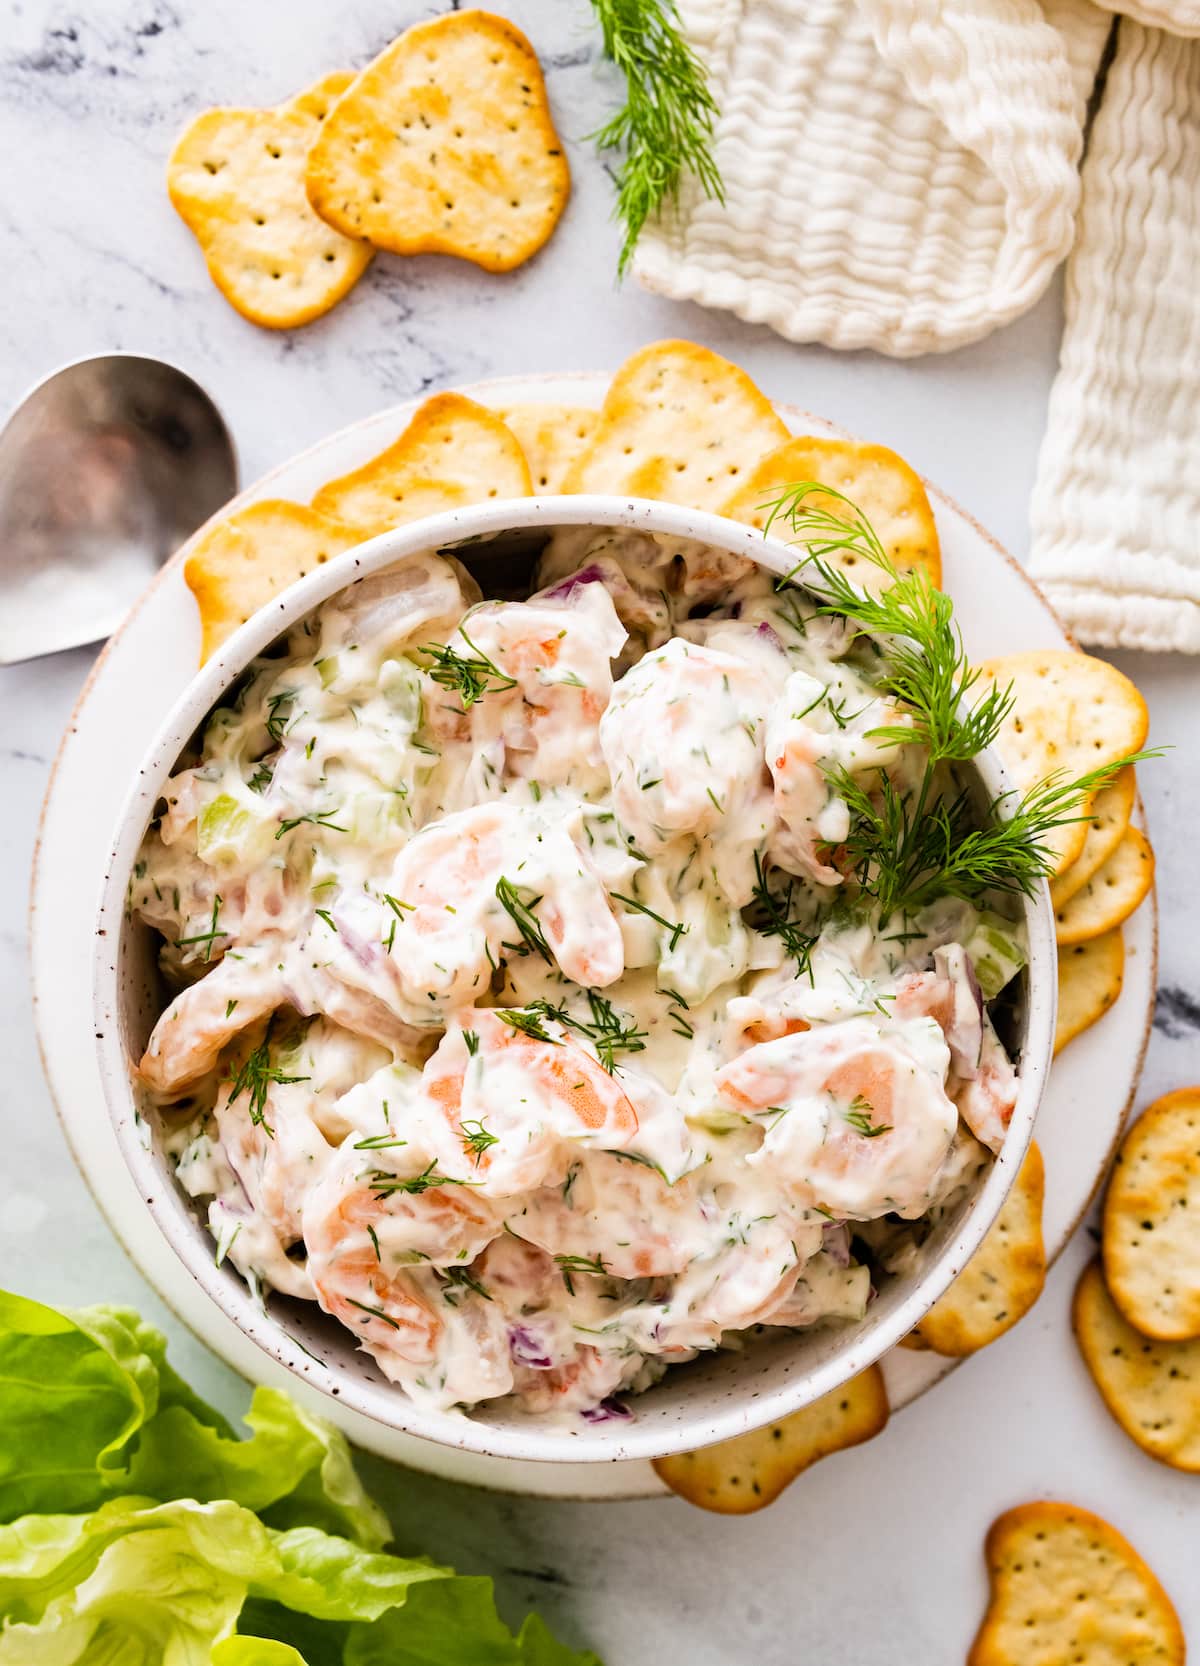 Shrimp salad in a serving bowl topped with fresh dill and served with crackers on the side.